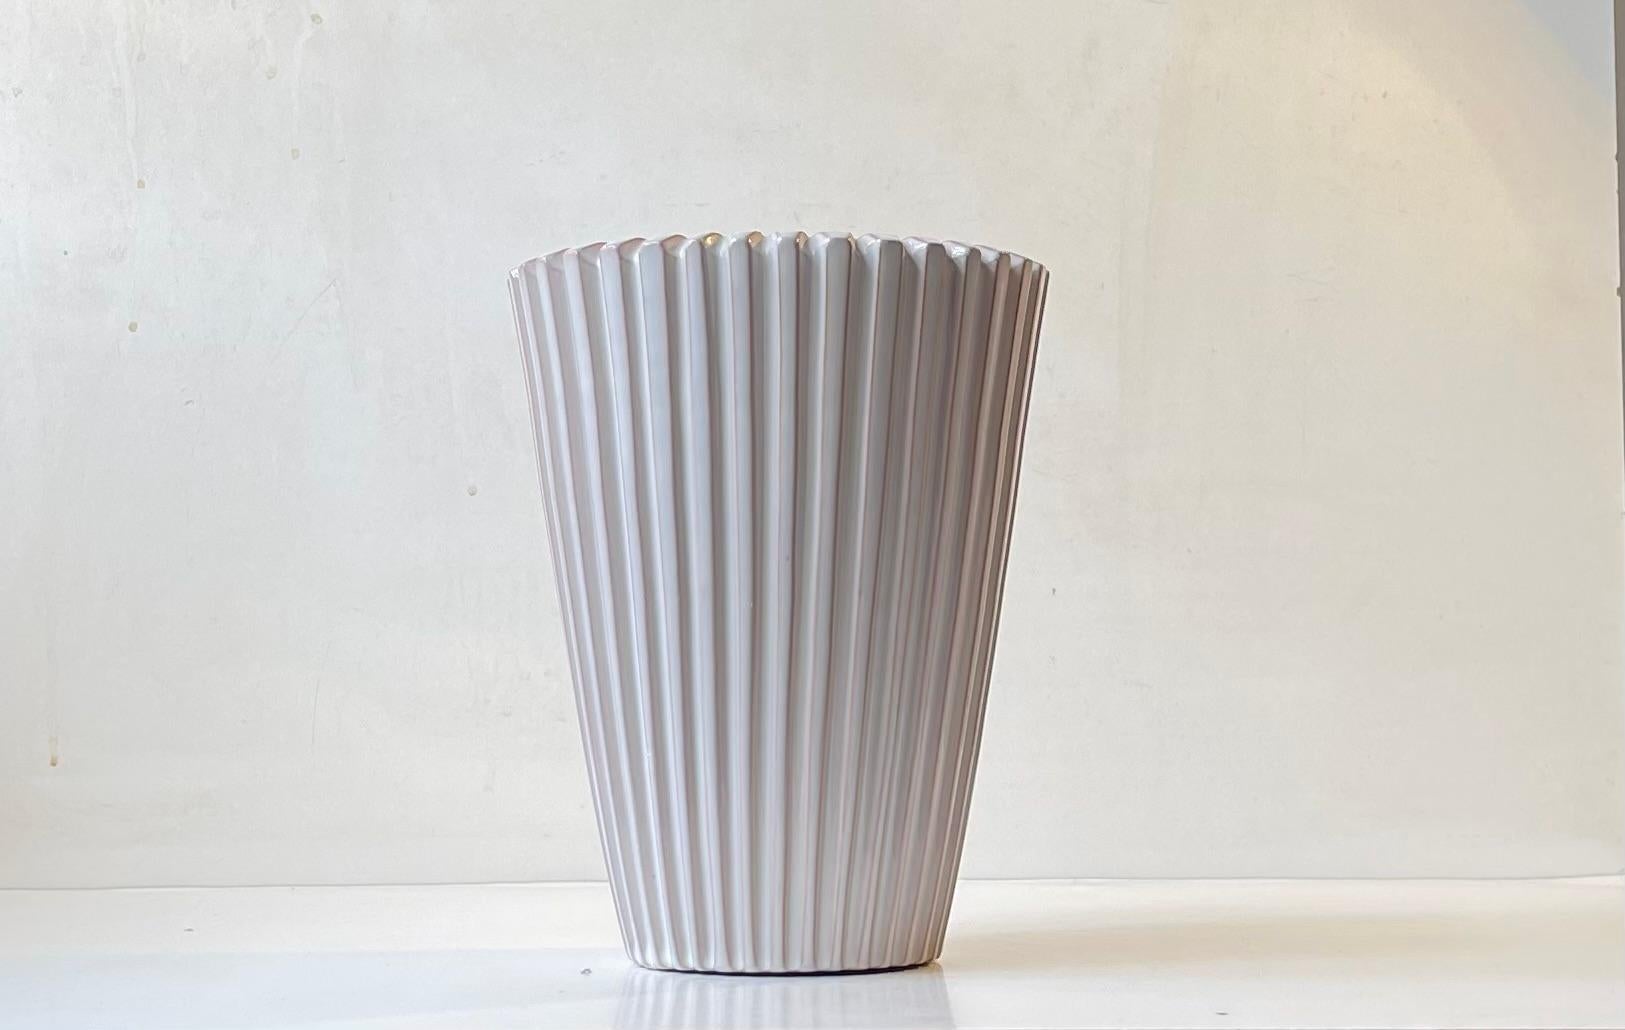 Large Art deco style ceramic vase from the 1950s. Fluted fully glazed corpus in white glaze. Its designed by Agnethe Sørensen and made by Eslau in Denmark during the 1950s or 60s. This particular example is the largest in this design we have seen.